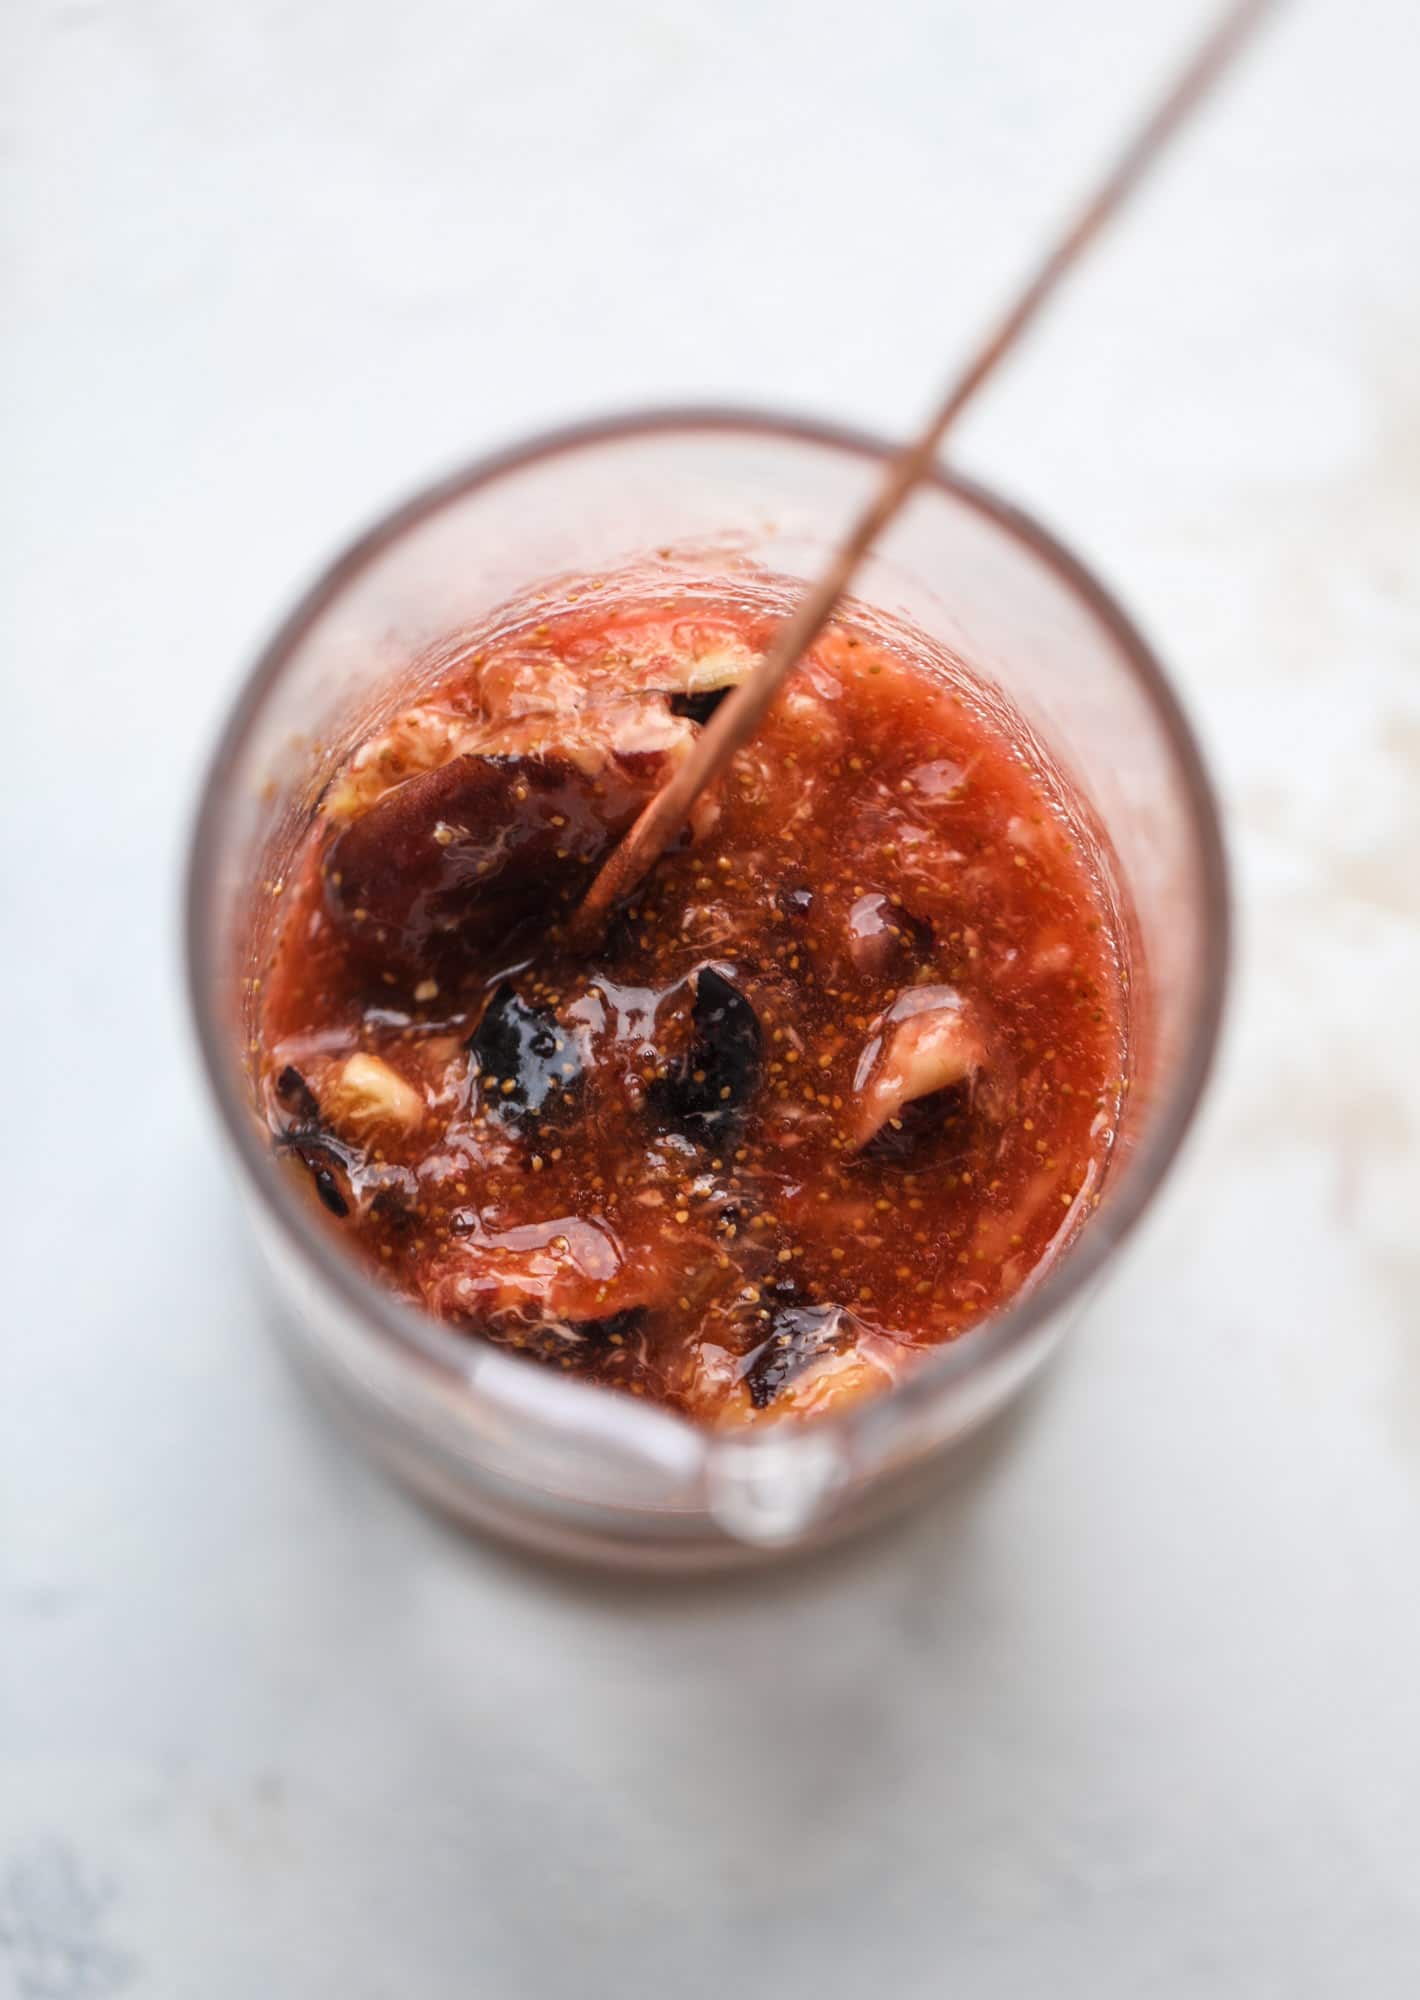 This new fig cocktail is so delicious and perfect for your fresh juicy figs! Muddle the fresh figs with brown sugar and a touch of lemon, then add them to a glass with crushed ice and pour some bubbly on top. I love Prosecco, but you can use a sweeter bubbly too! I howsweeteats.com #fig #cocktail #brown #sugar #prosecco